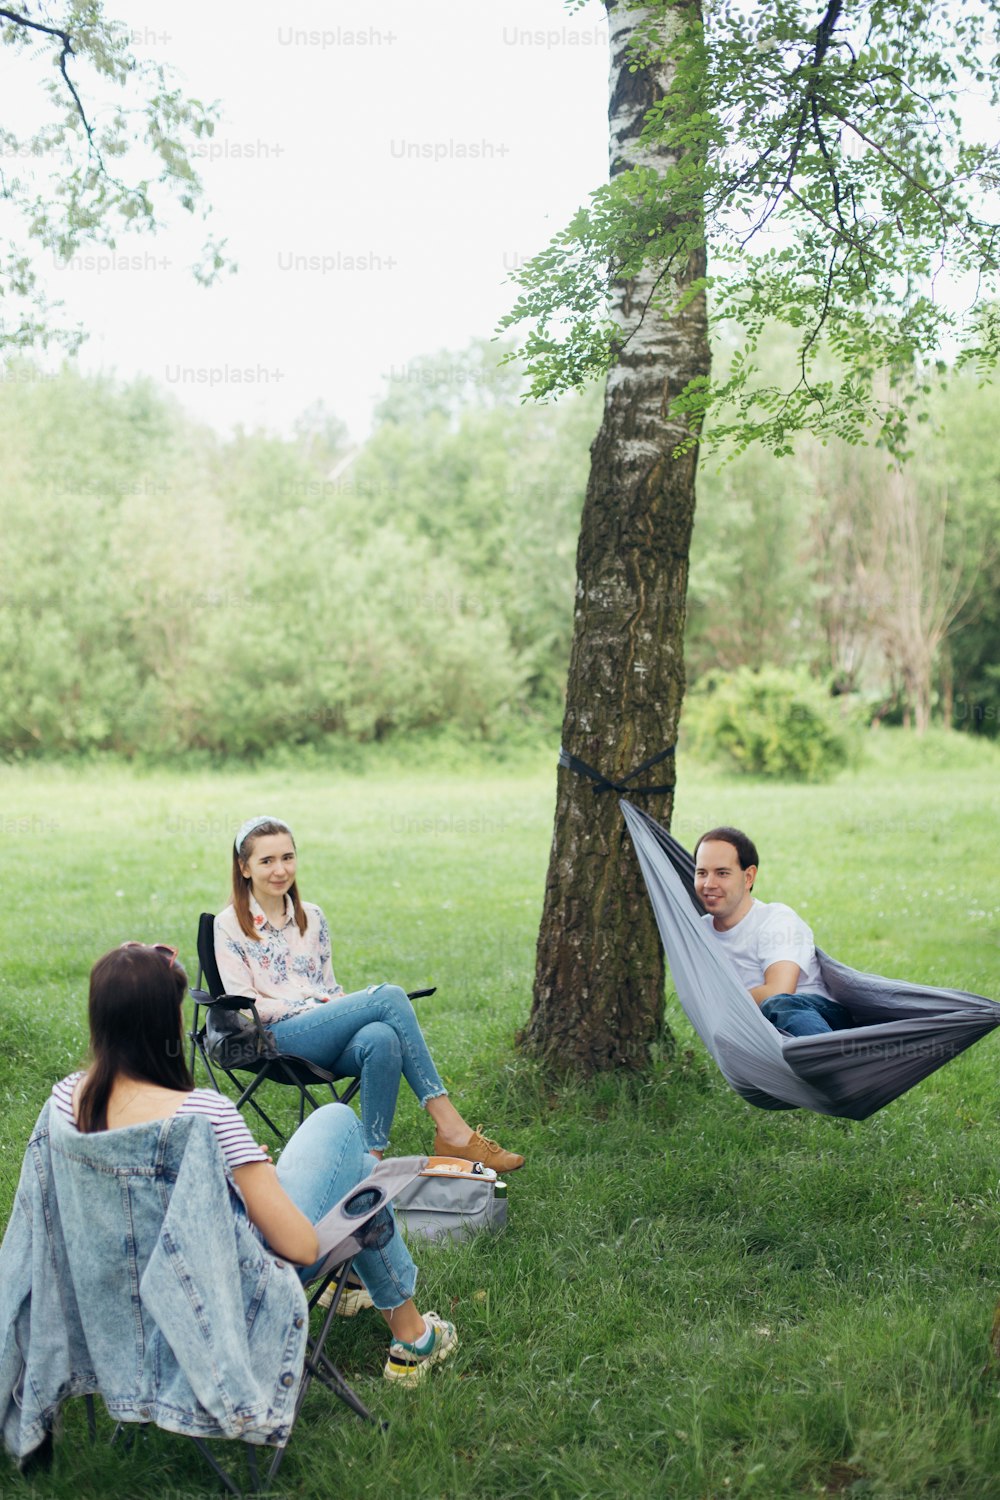 Social distancing. Small group of people enjoying conversation at picnic with social distance in summer park. Leisure activity together in new normal, gatherings following safety protocols